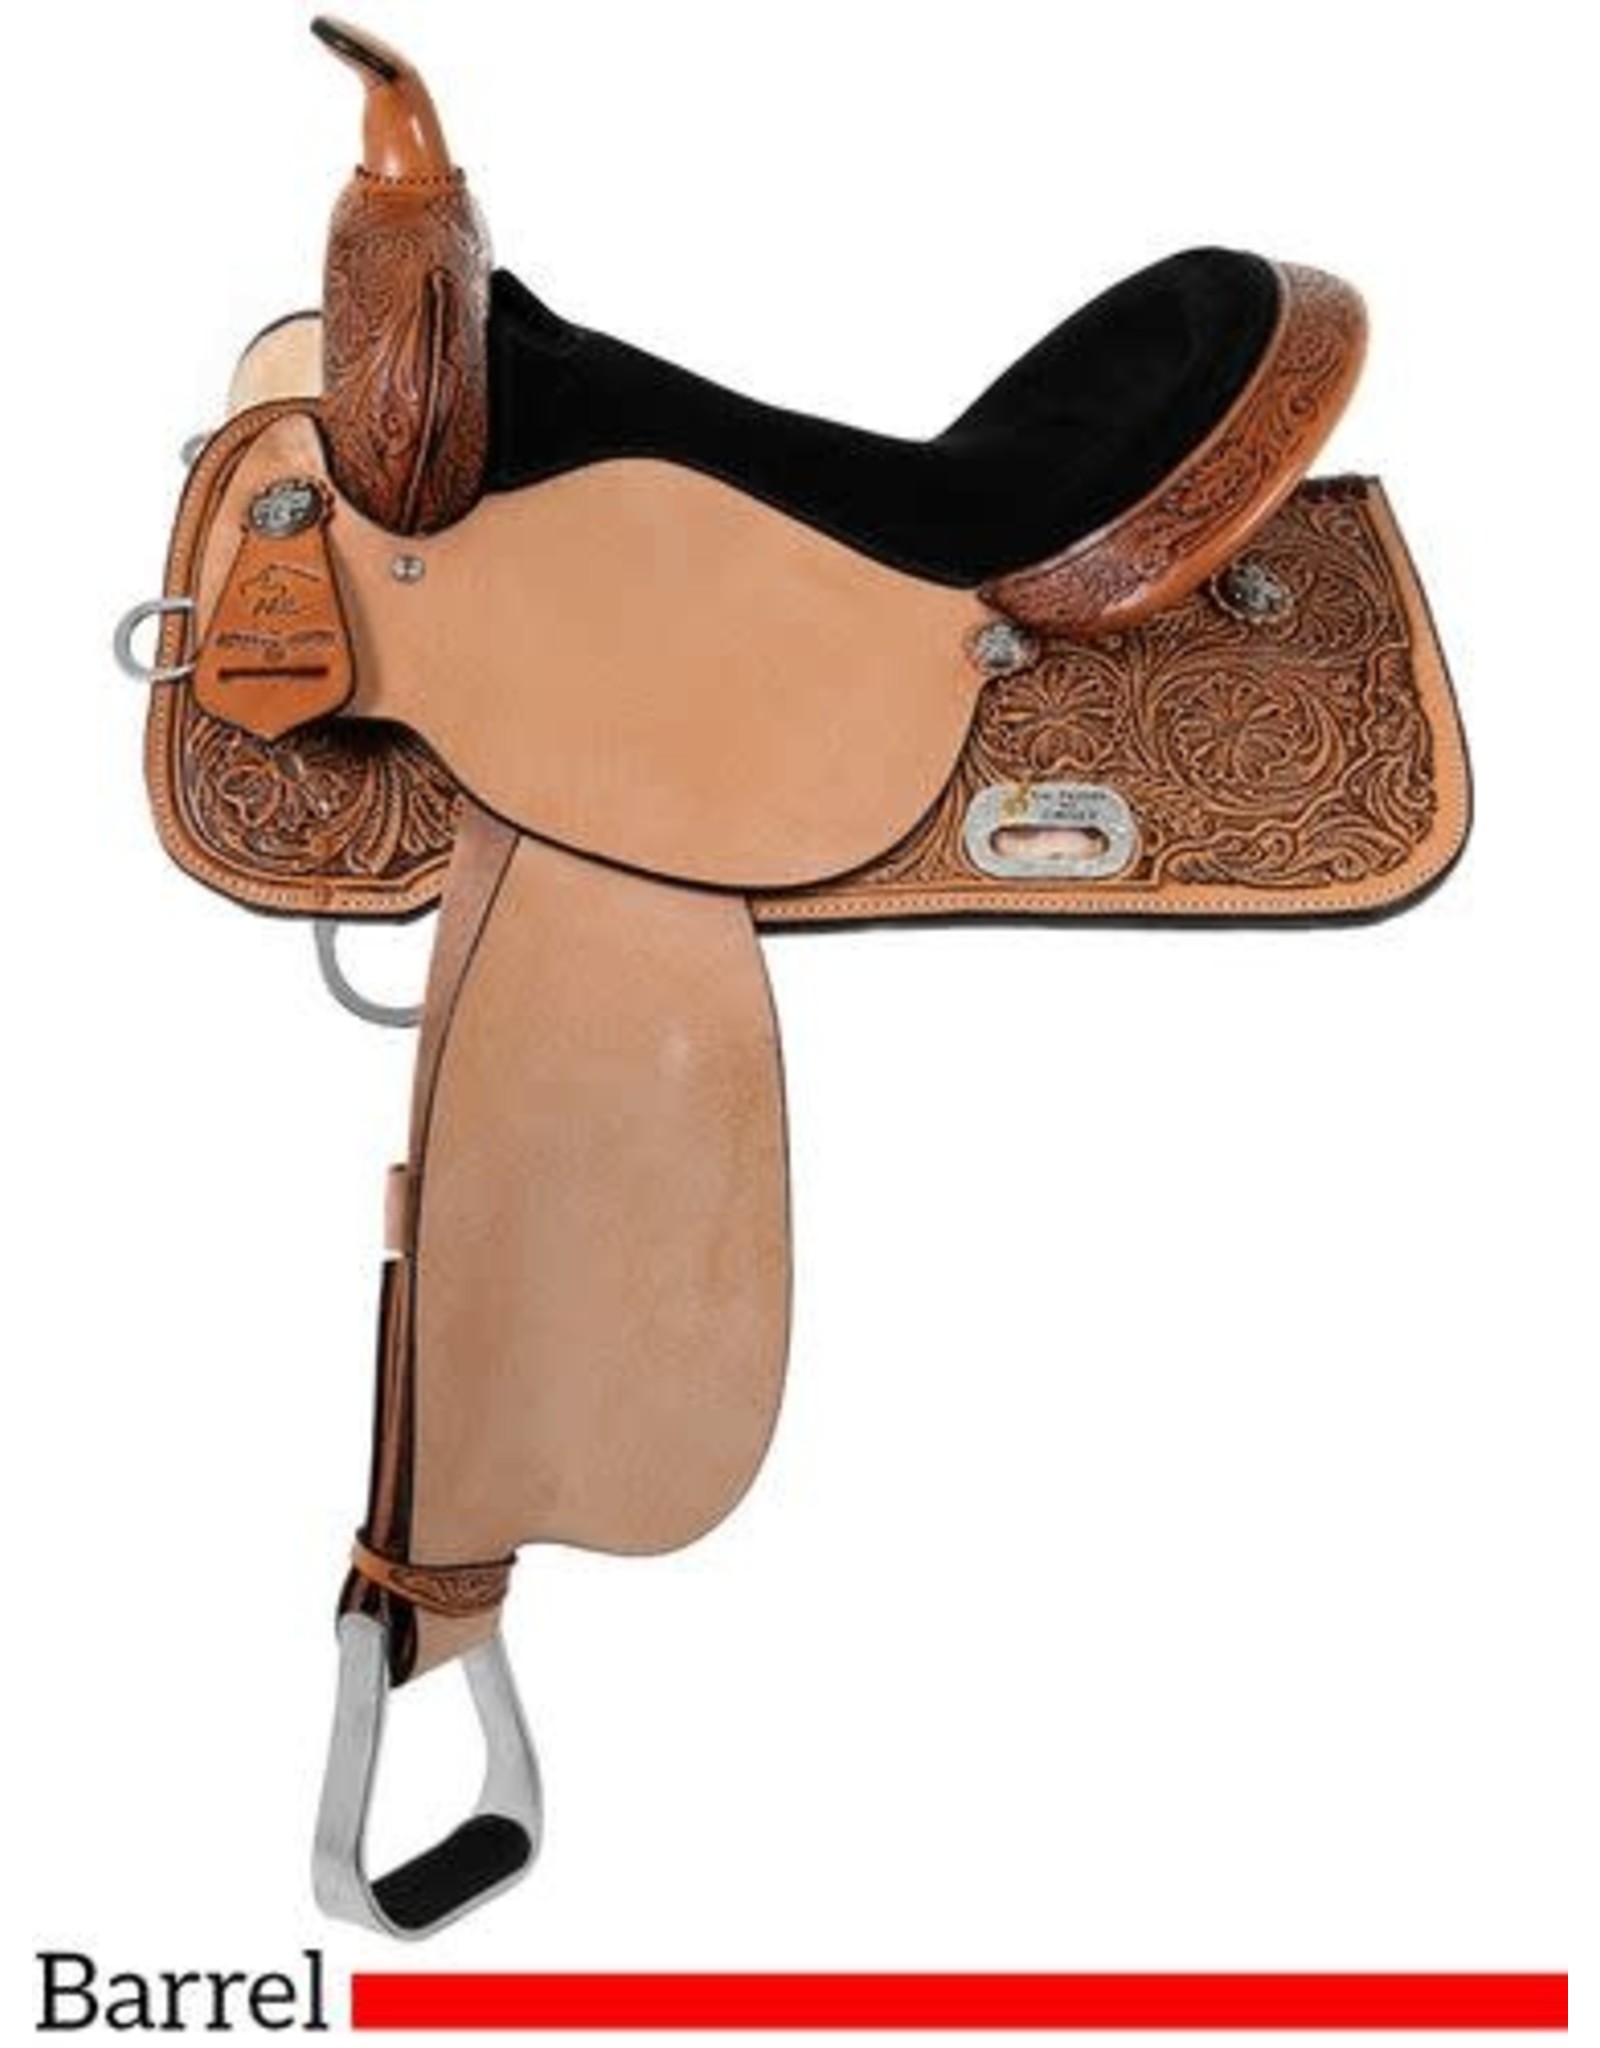 Circle Y Circle Y Proven Antique Mansfield Maltese Cross Oversized 15" Seat Wide Tree 6221-2506-05 Barrel Saddle